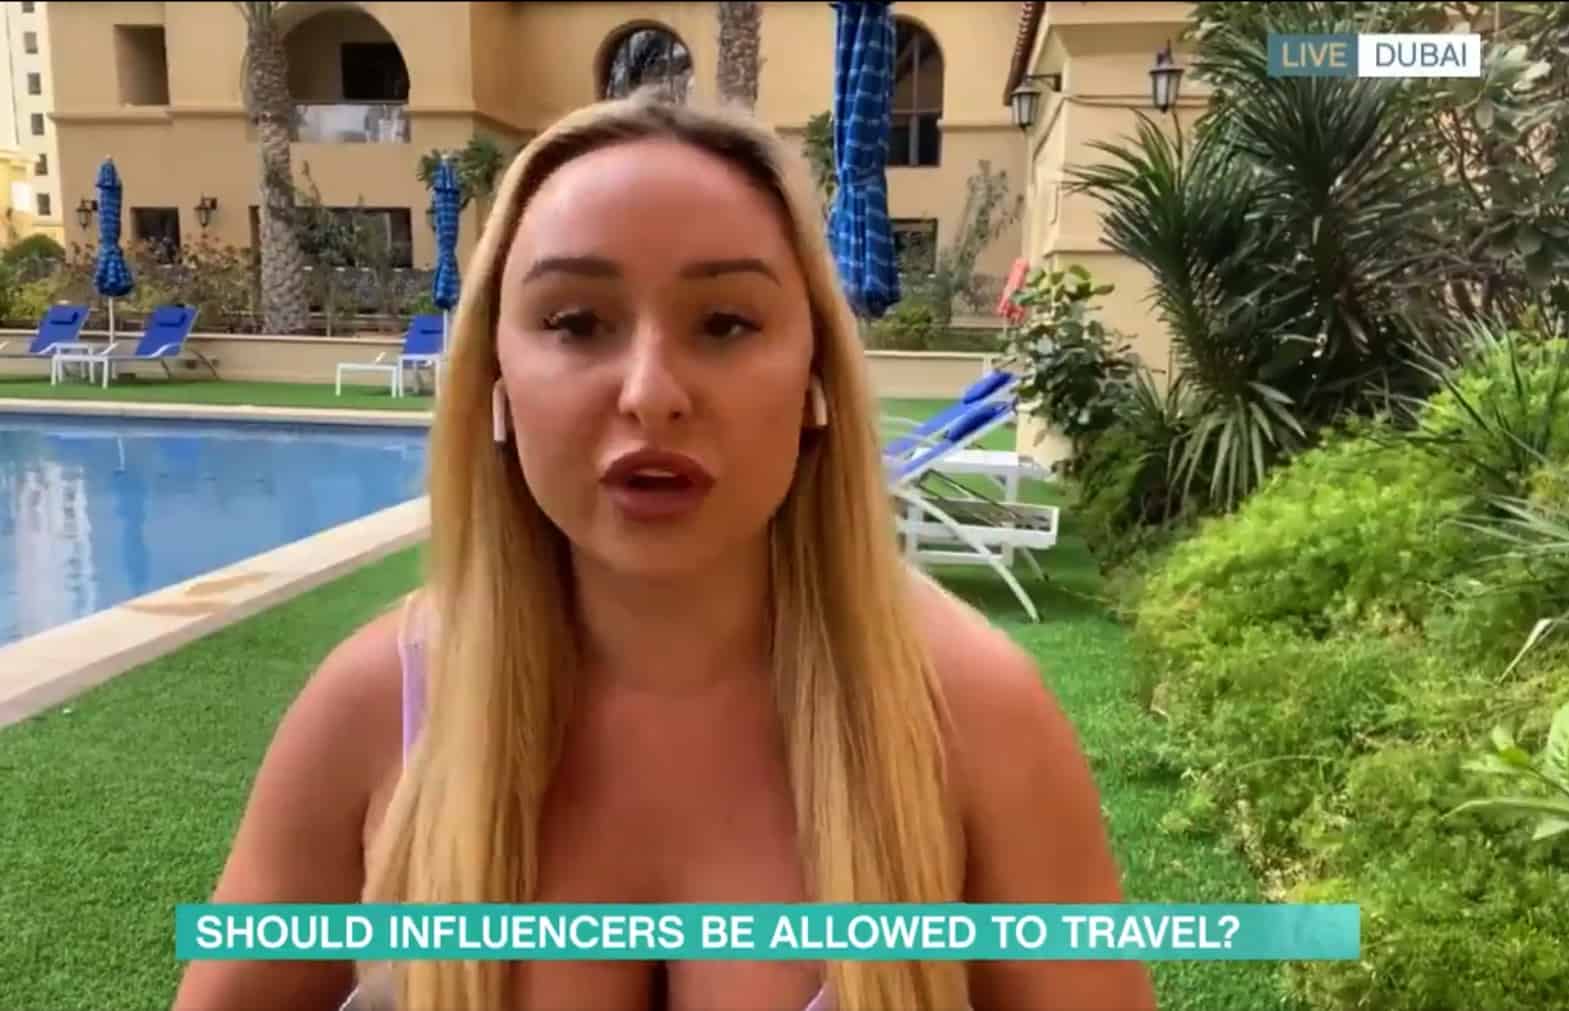 Influencer in Dubai to “motivate people” receives dressing down from ICU doctor